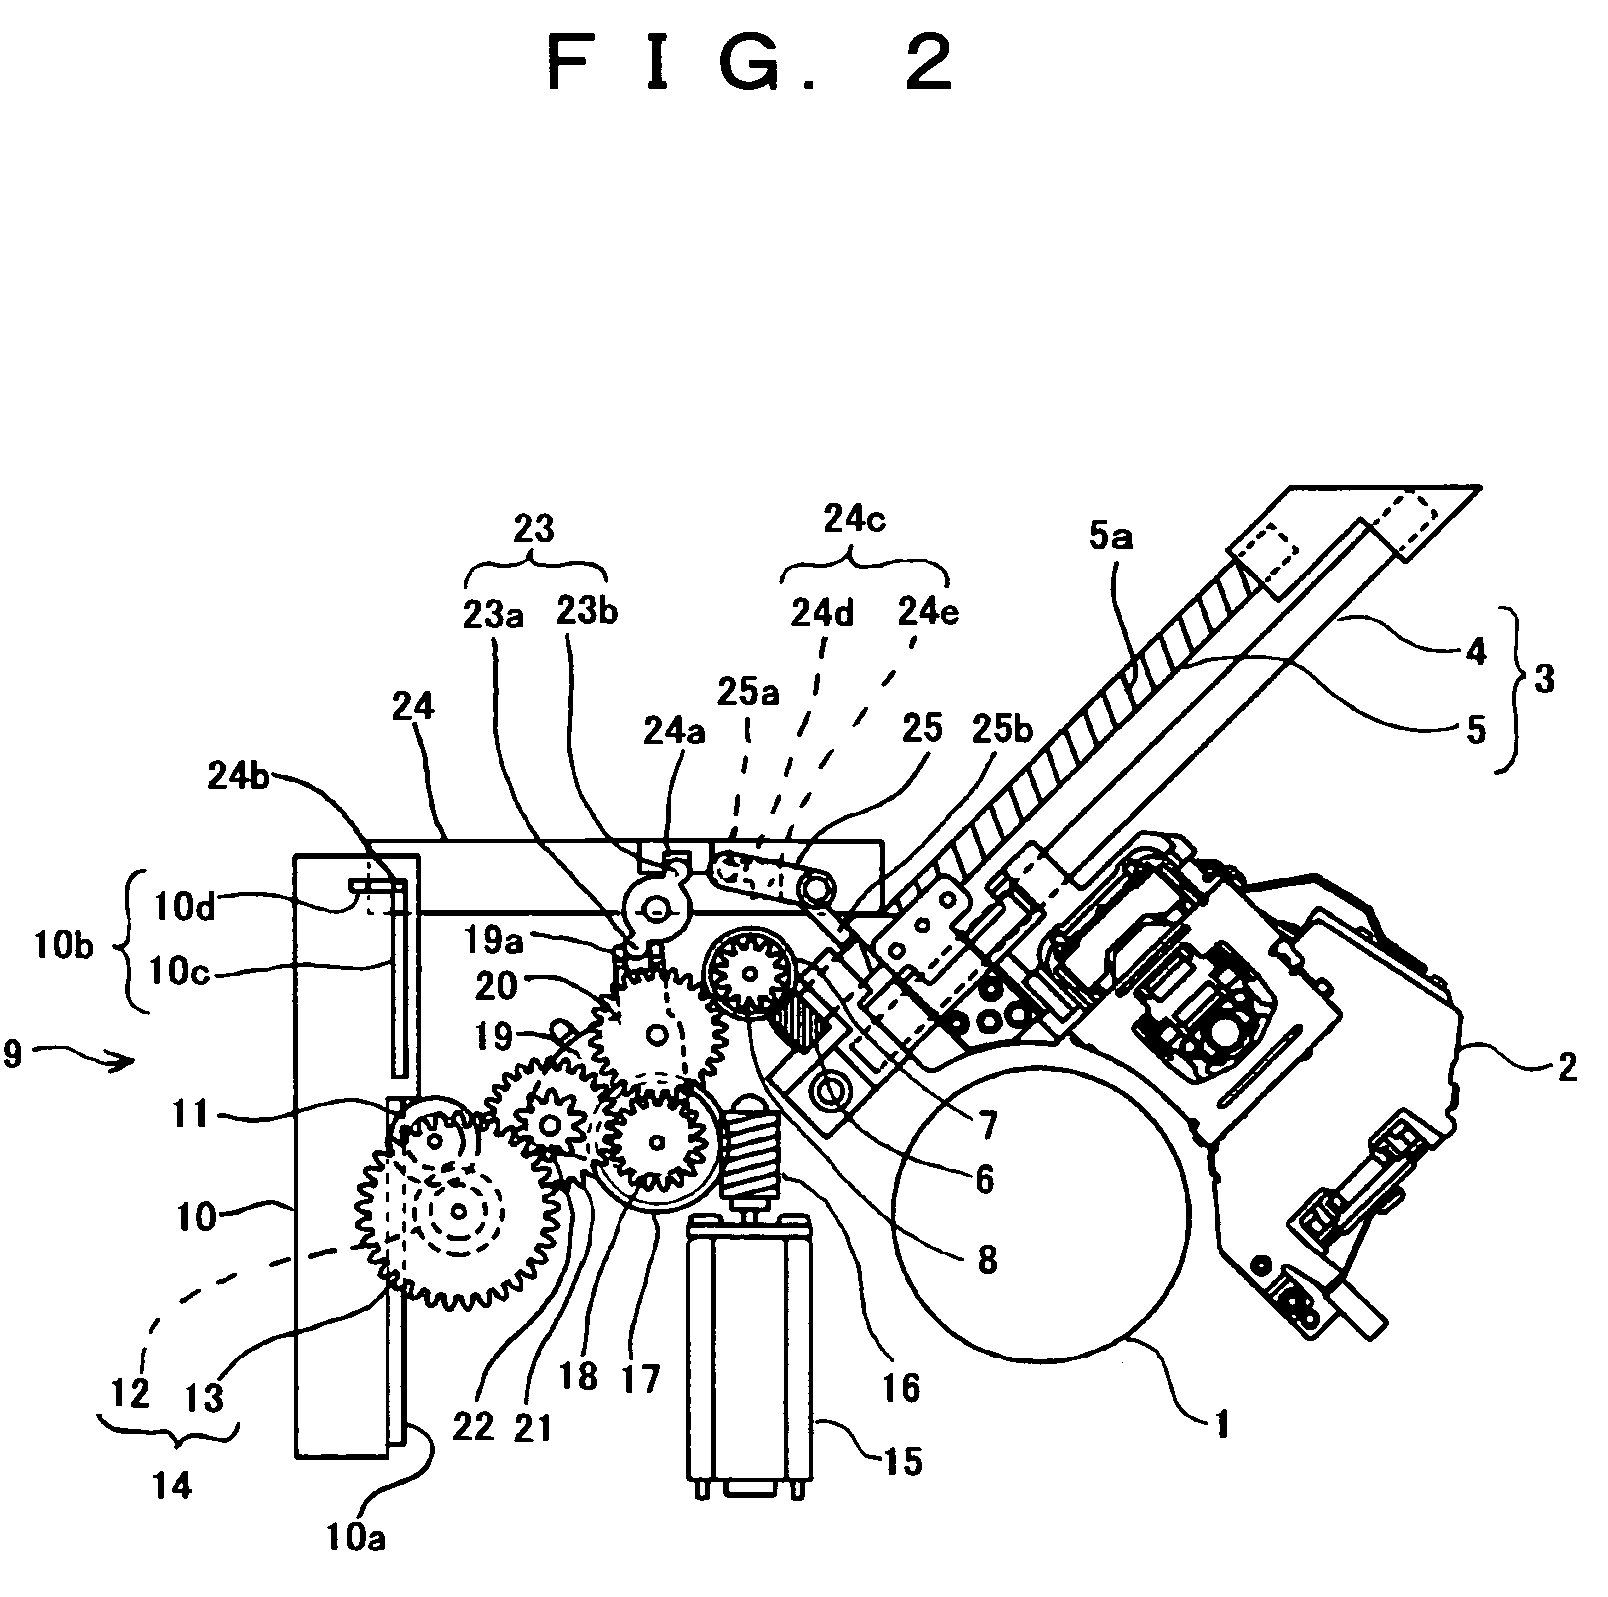 Power switching system for acoustic apparatus